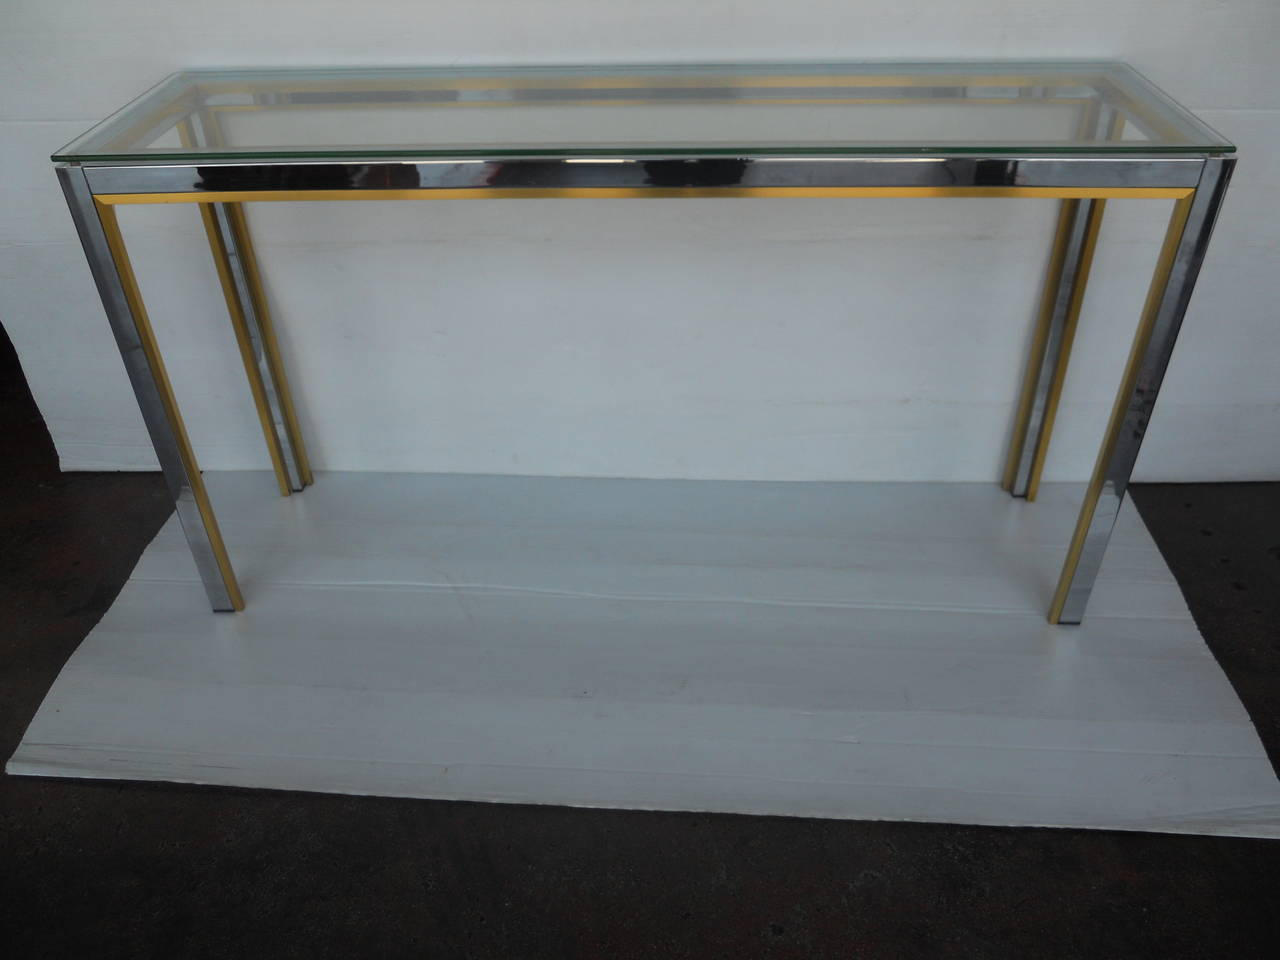 Sleek Italian console made of chrome with brass detail and clear glass top.